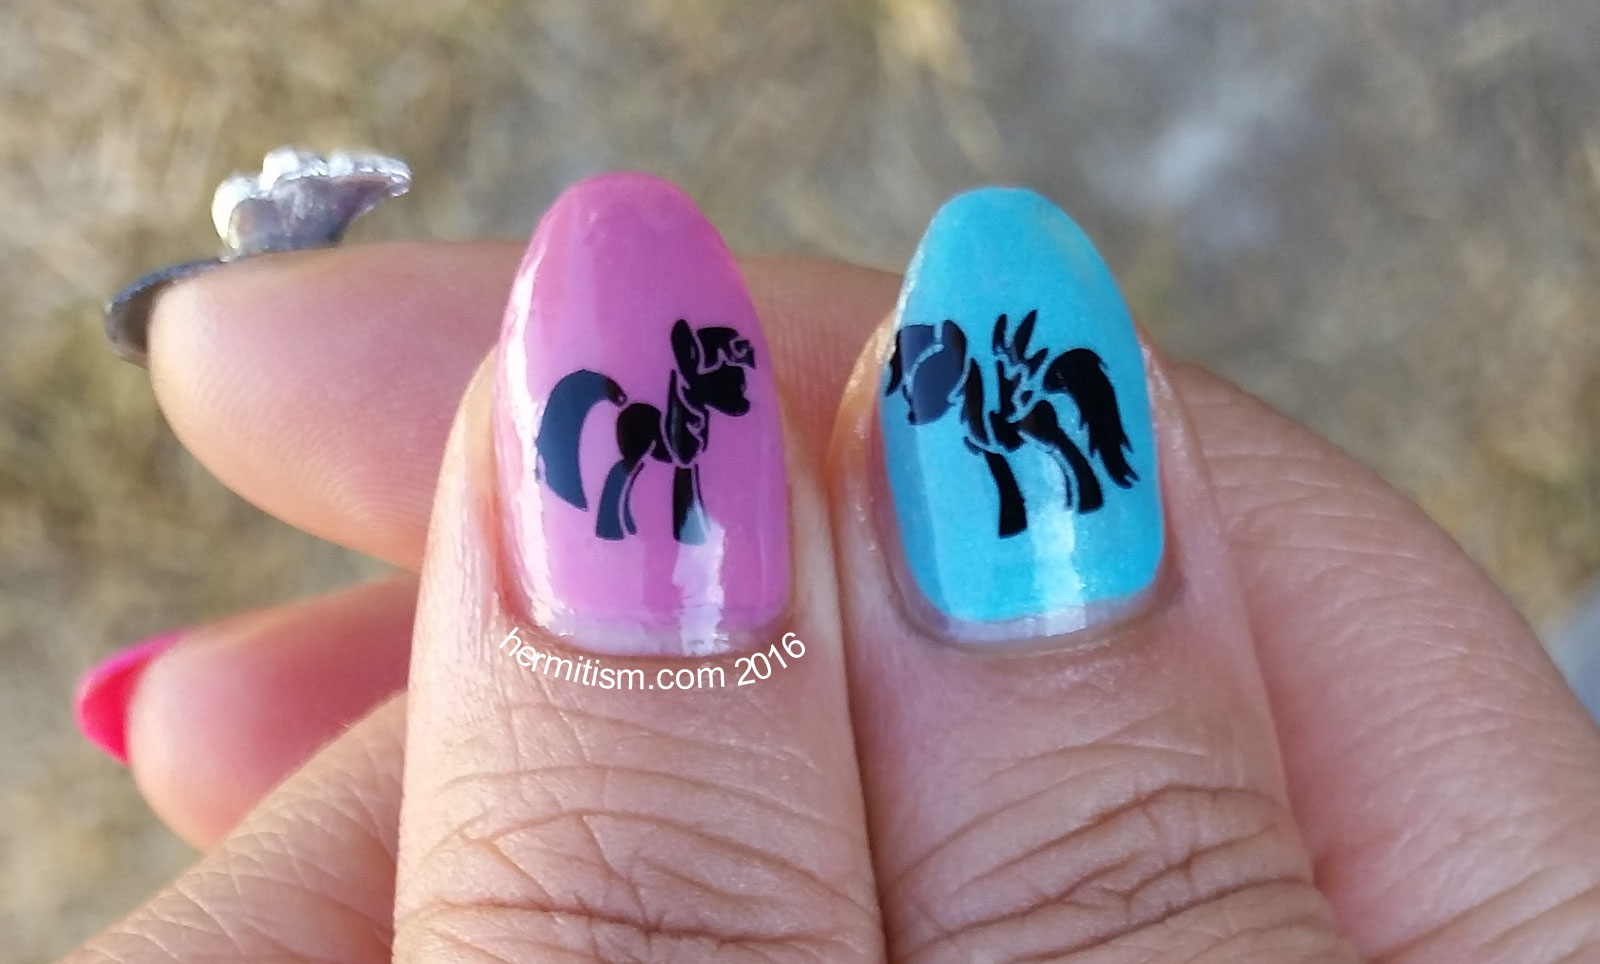 M is for My Little Pony - ABC Nail Art Challenge - Hermit Werds